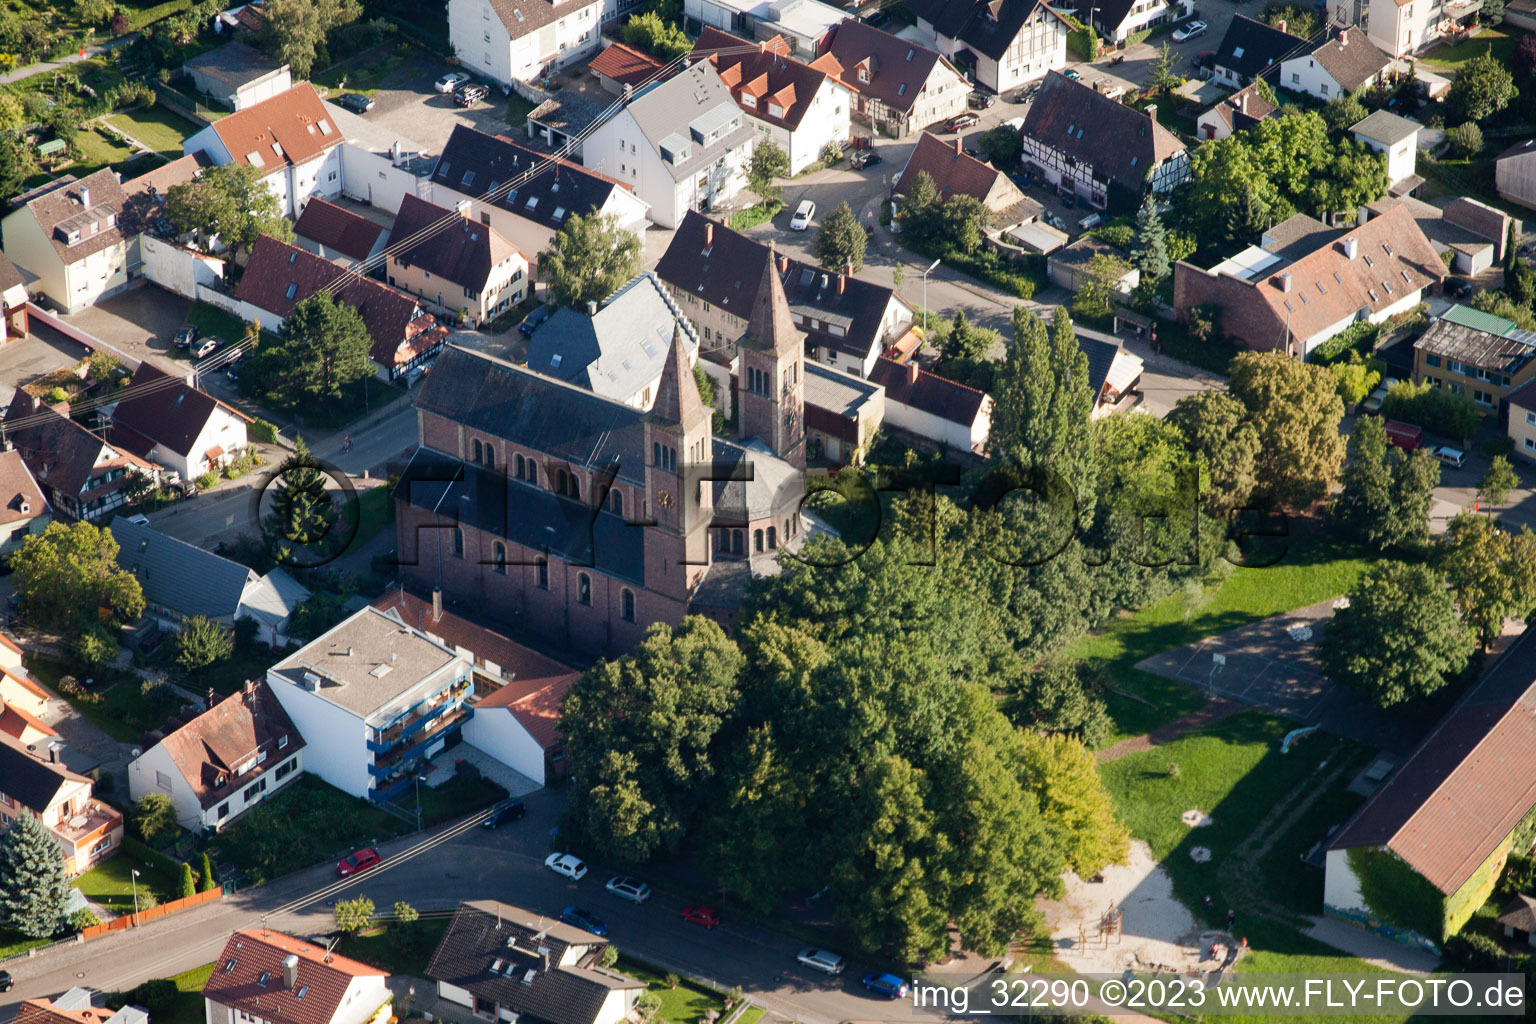 St. Cyriacus in the district Beiertheim-Bulach in Karlsruhe in the state Baden-Wuerttemberg, Germany from above